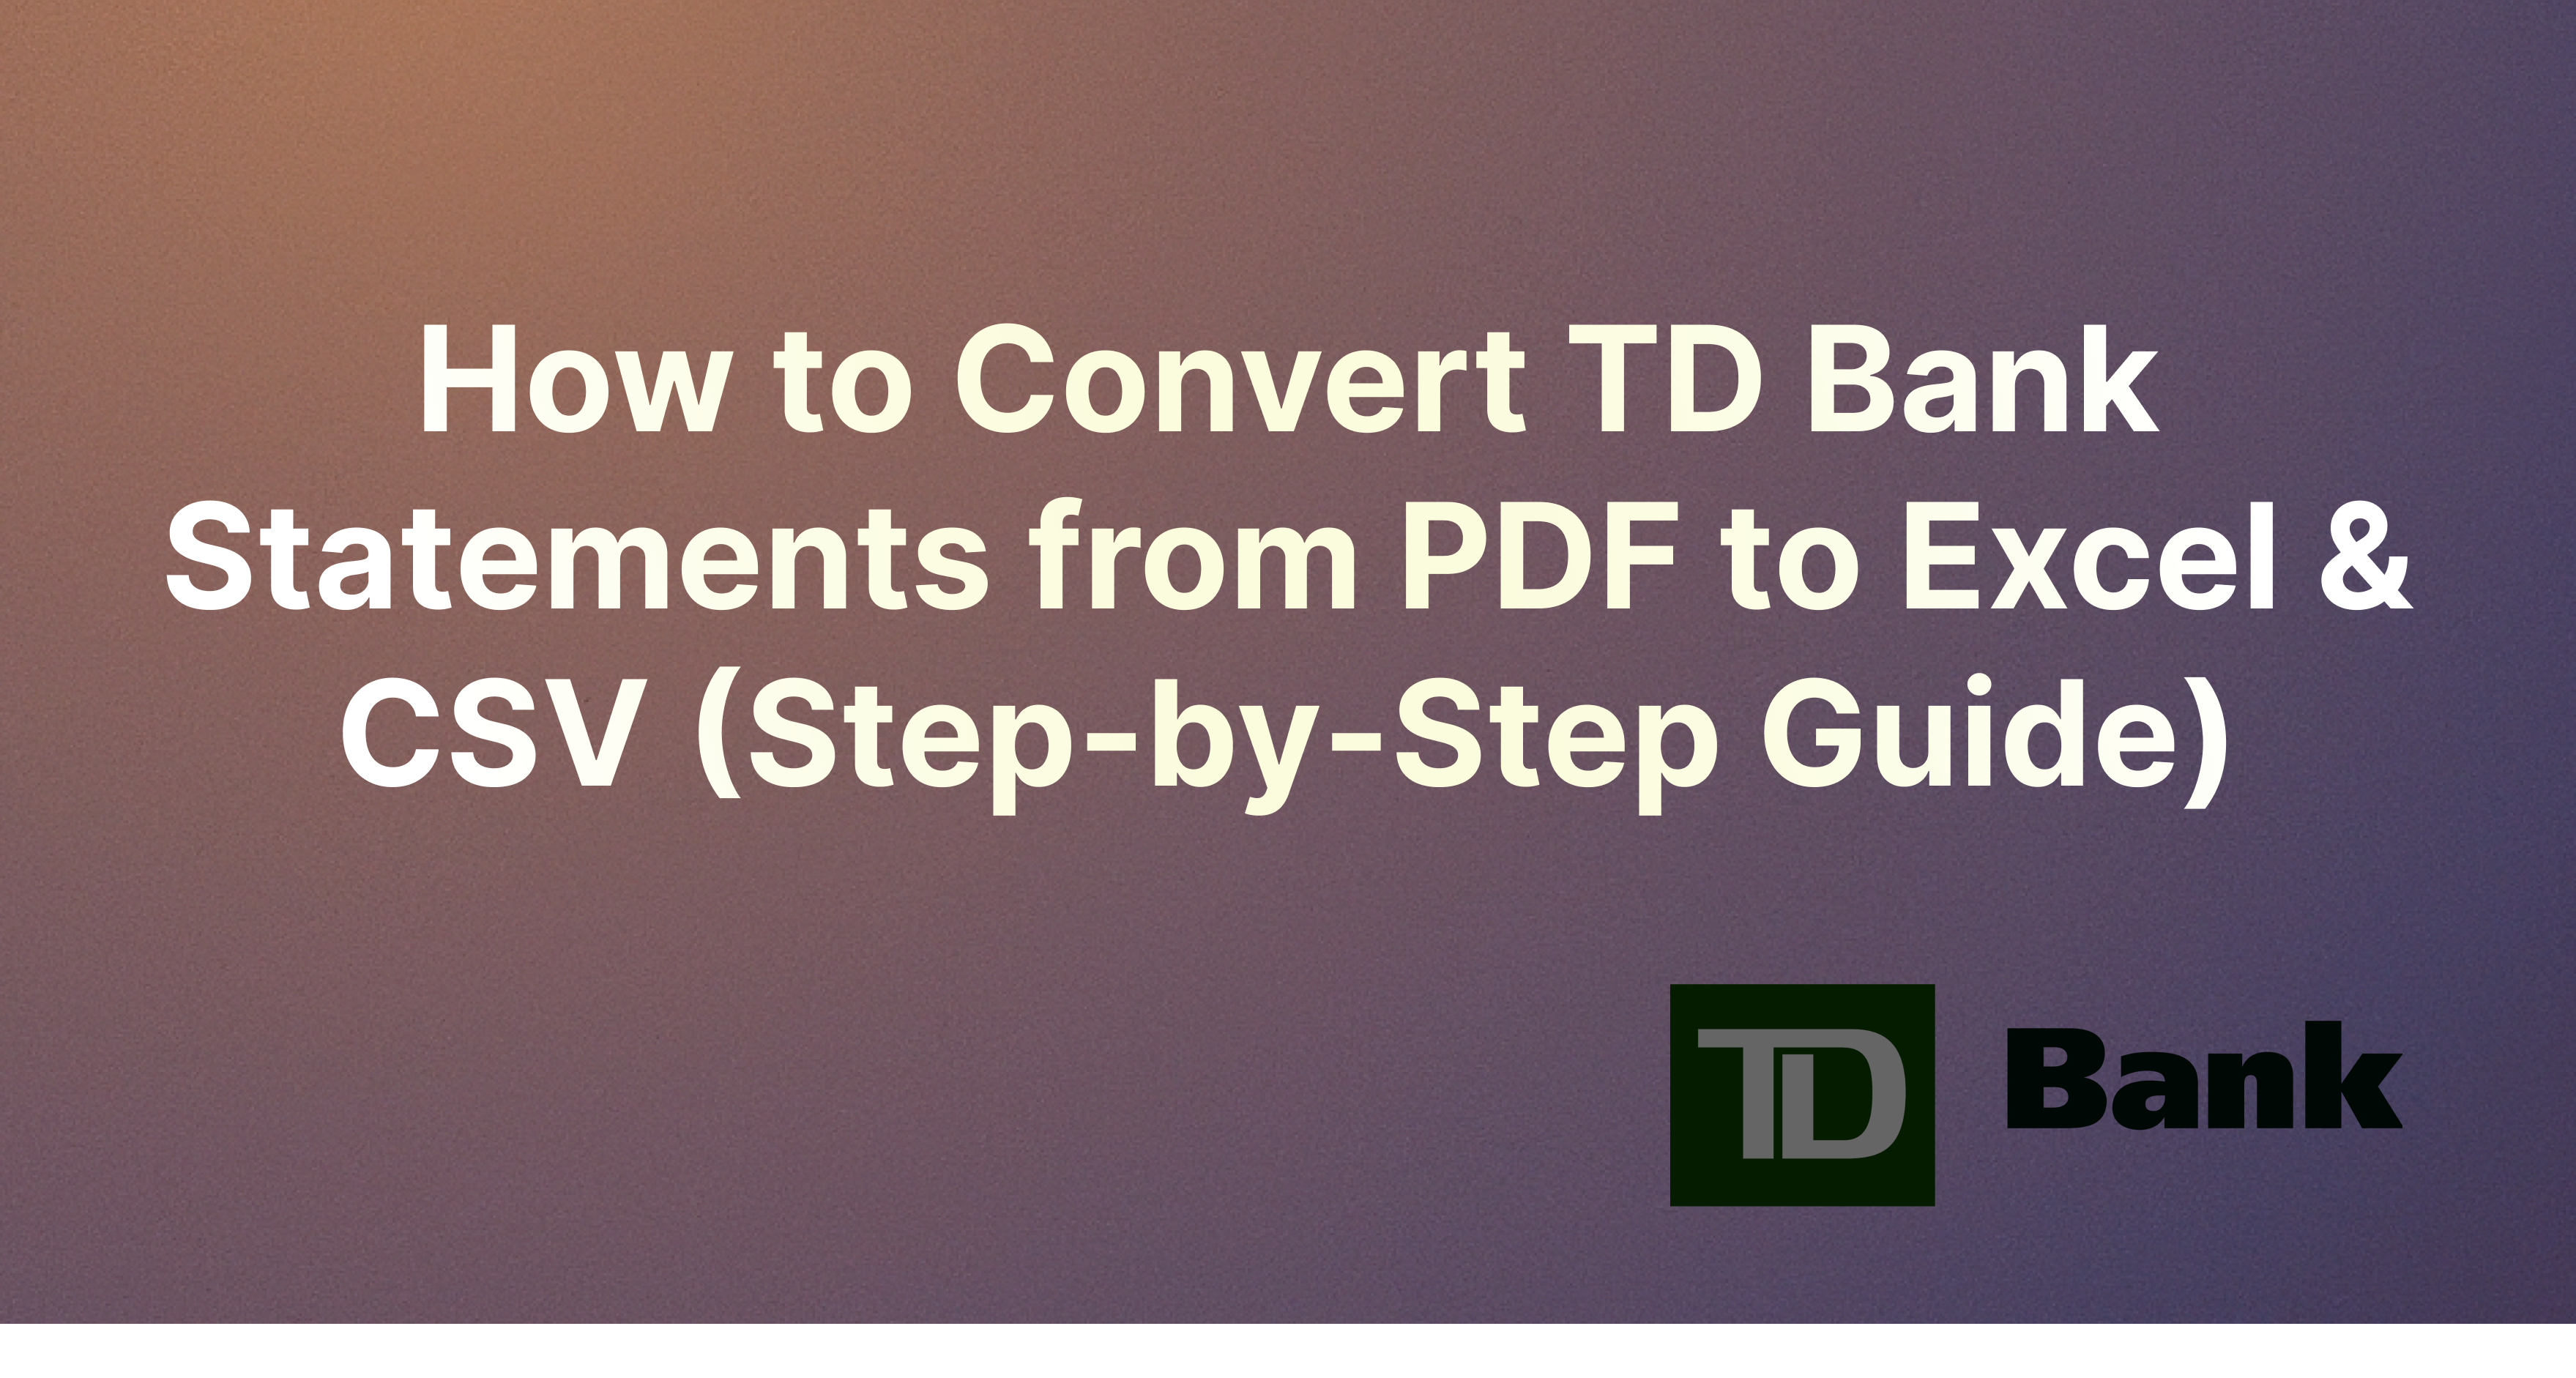 How to Convert TD Bank Statements from PDF to Excel & CSV (Step-by-Step Guide)